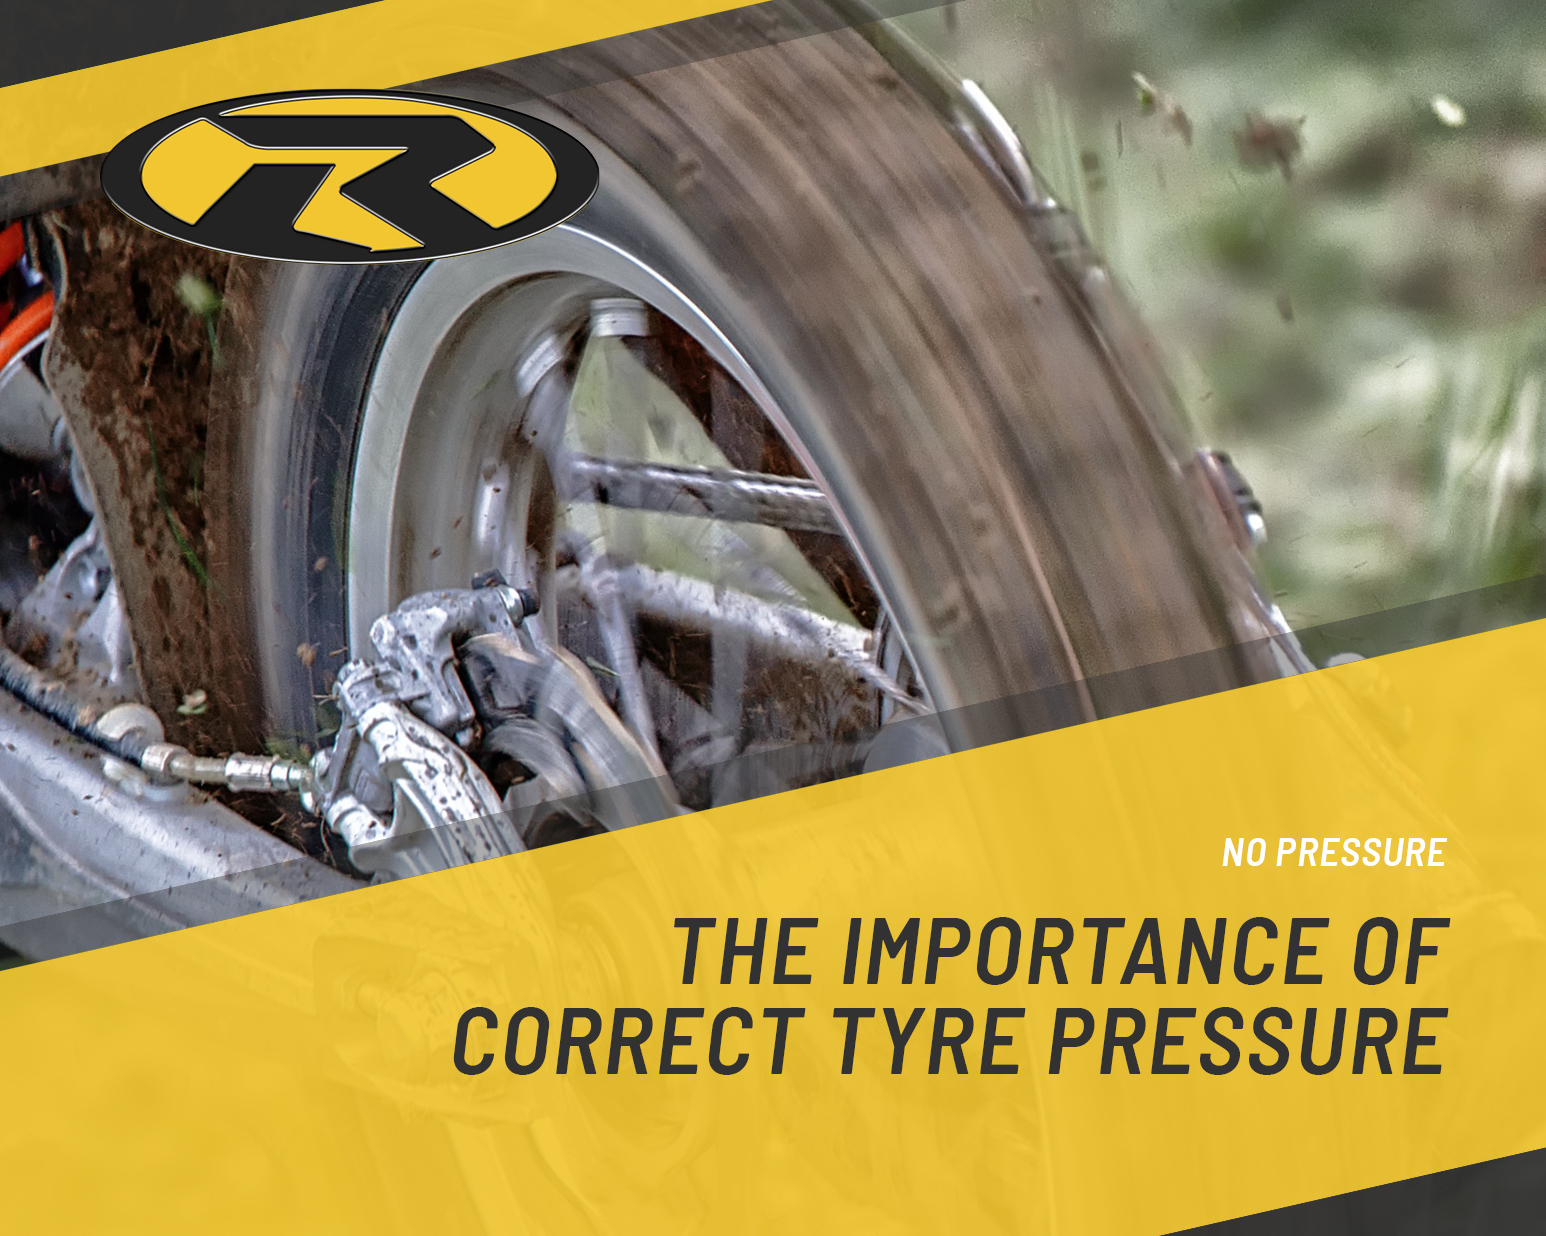 No Pressure – The importance of correct tyre pressure